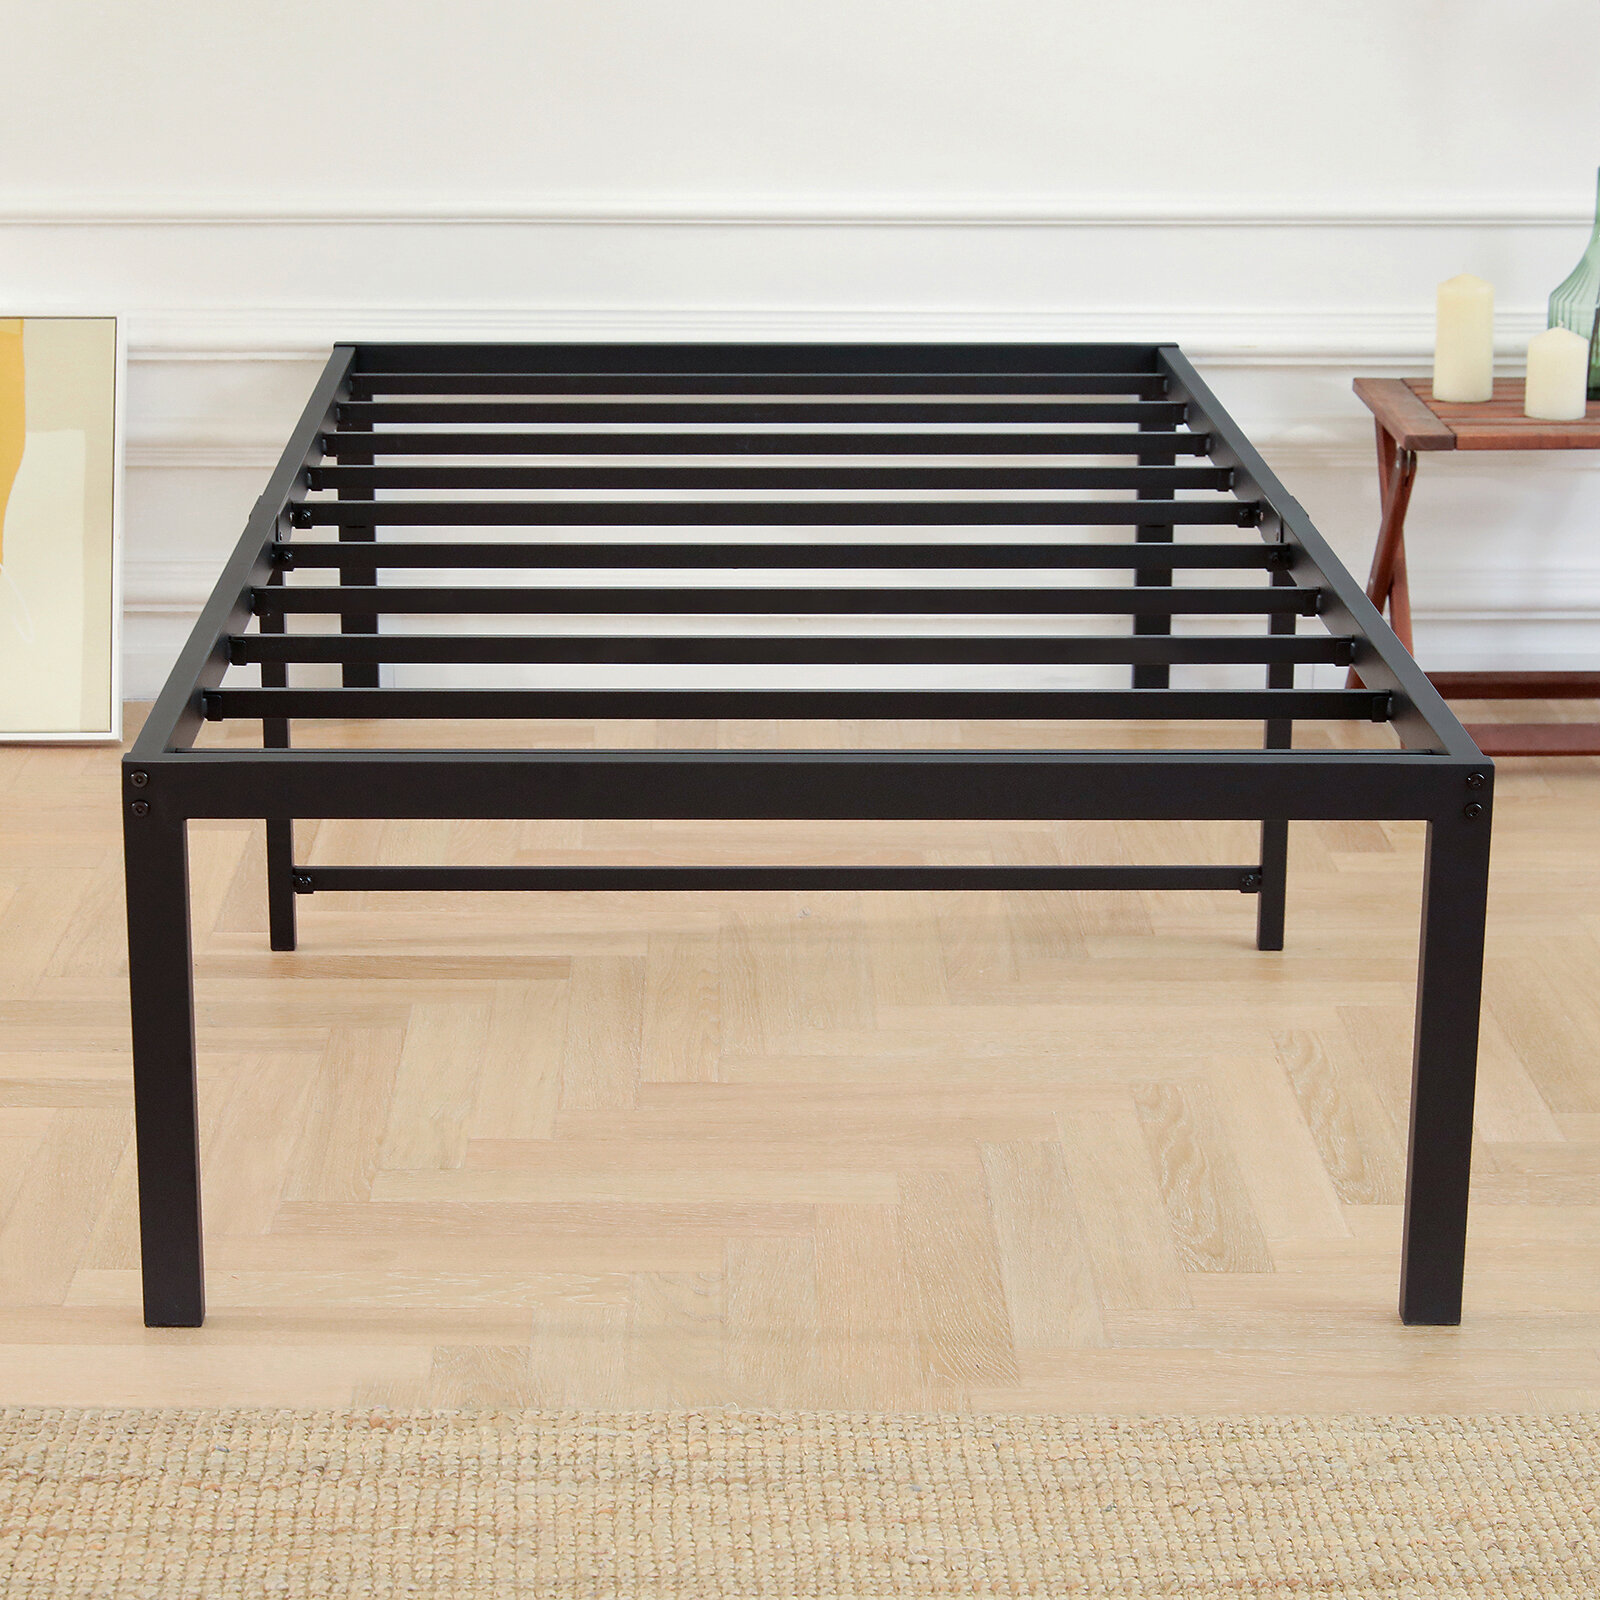 Lusimo 18 inch Twin XL Metal Platform Bed Frame with Heavy Duty Steel Slat Support Non-Slip and Noise-Free Mattress Foun